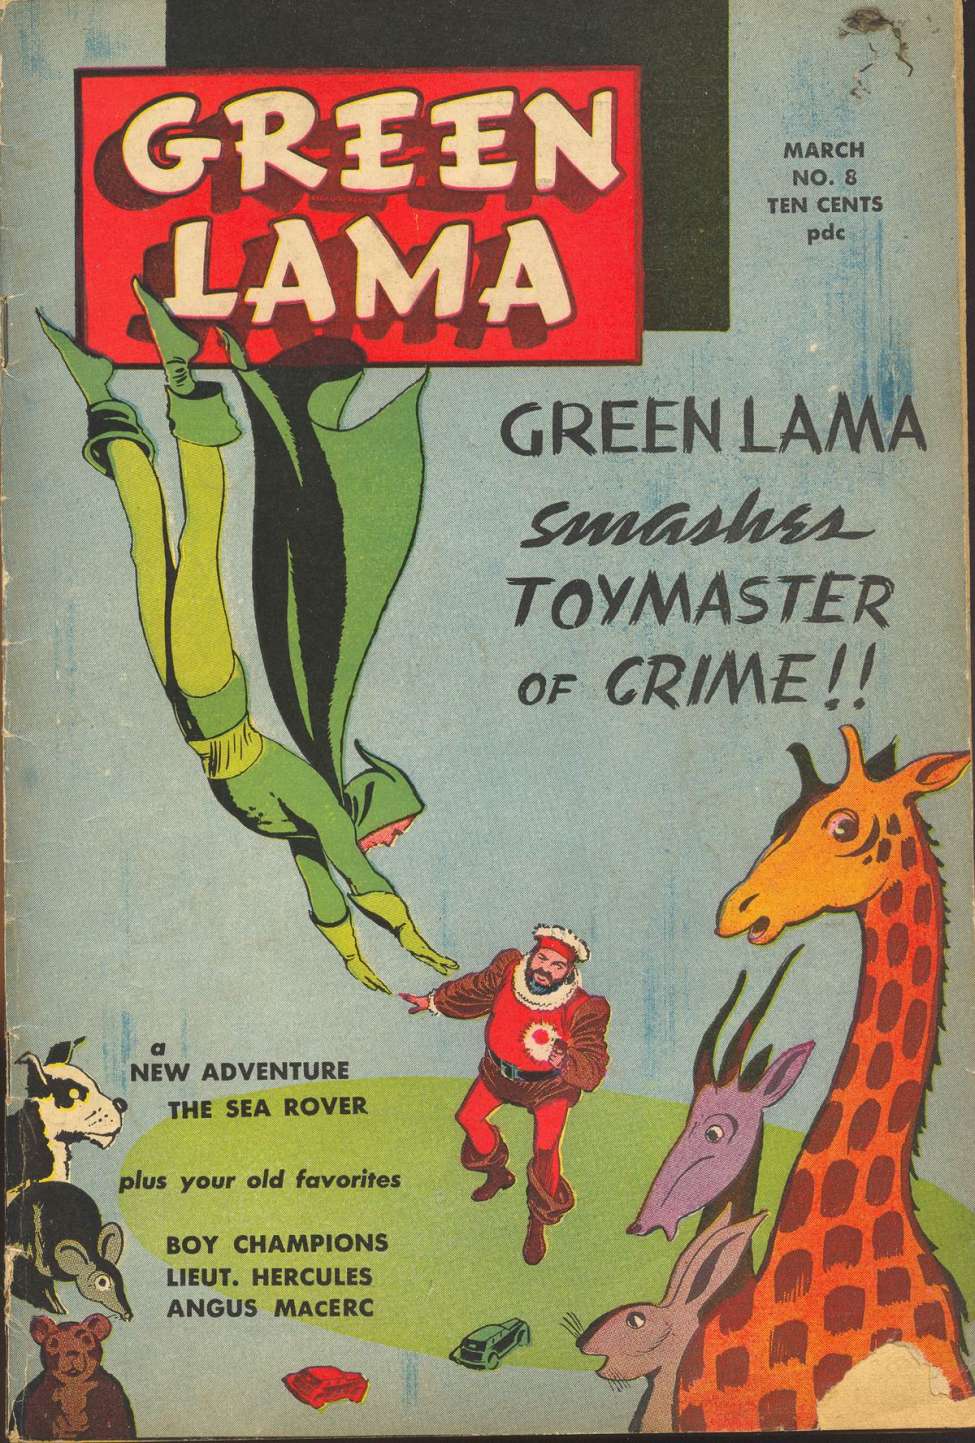 Book Cover For Green Lama 8